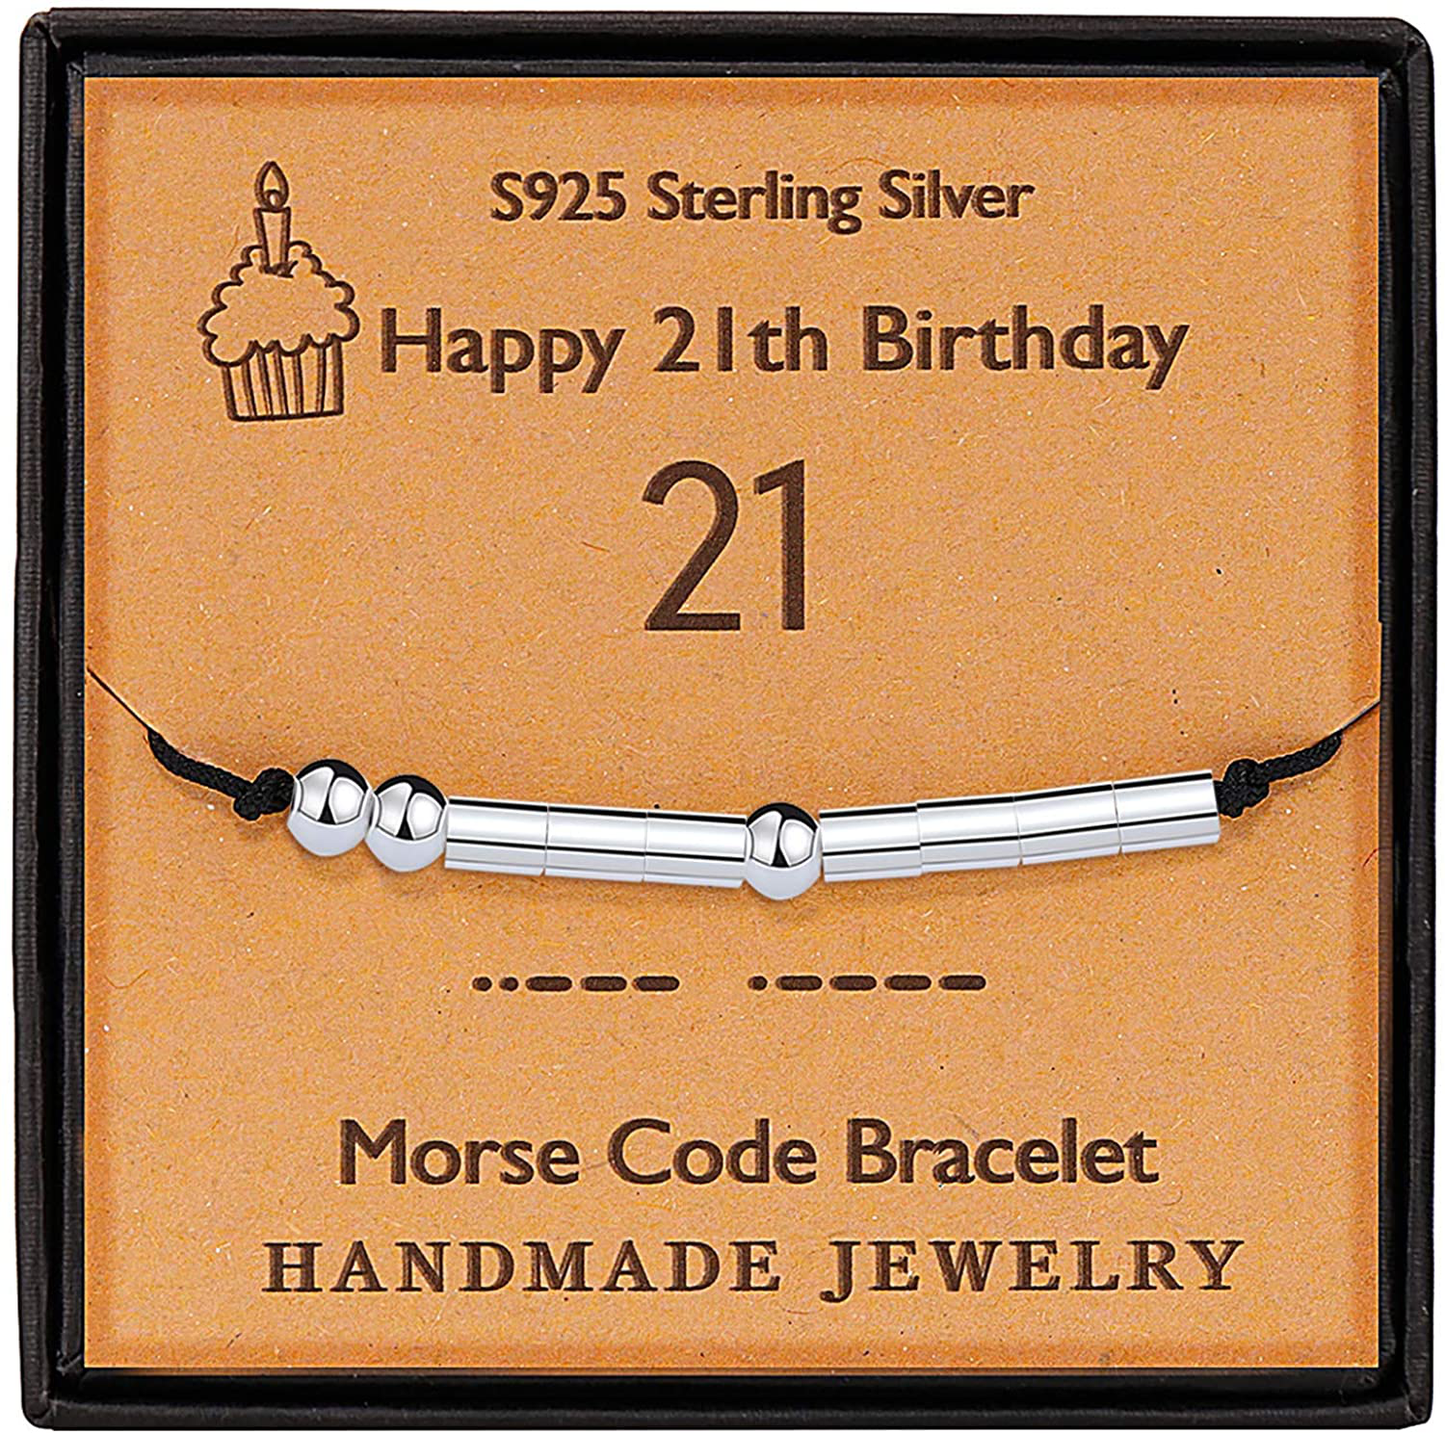 Gleamart Birthday Gift Morse Code Bracelet Sterling Silver Beads Silk Cord Bangle for 12th 13th 14th 15th 16th 17th 18th 19th 20th 21st